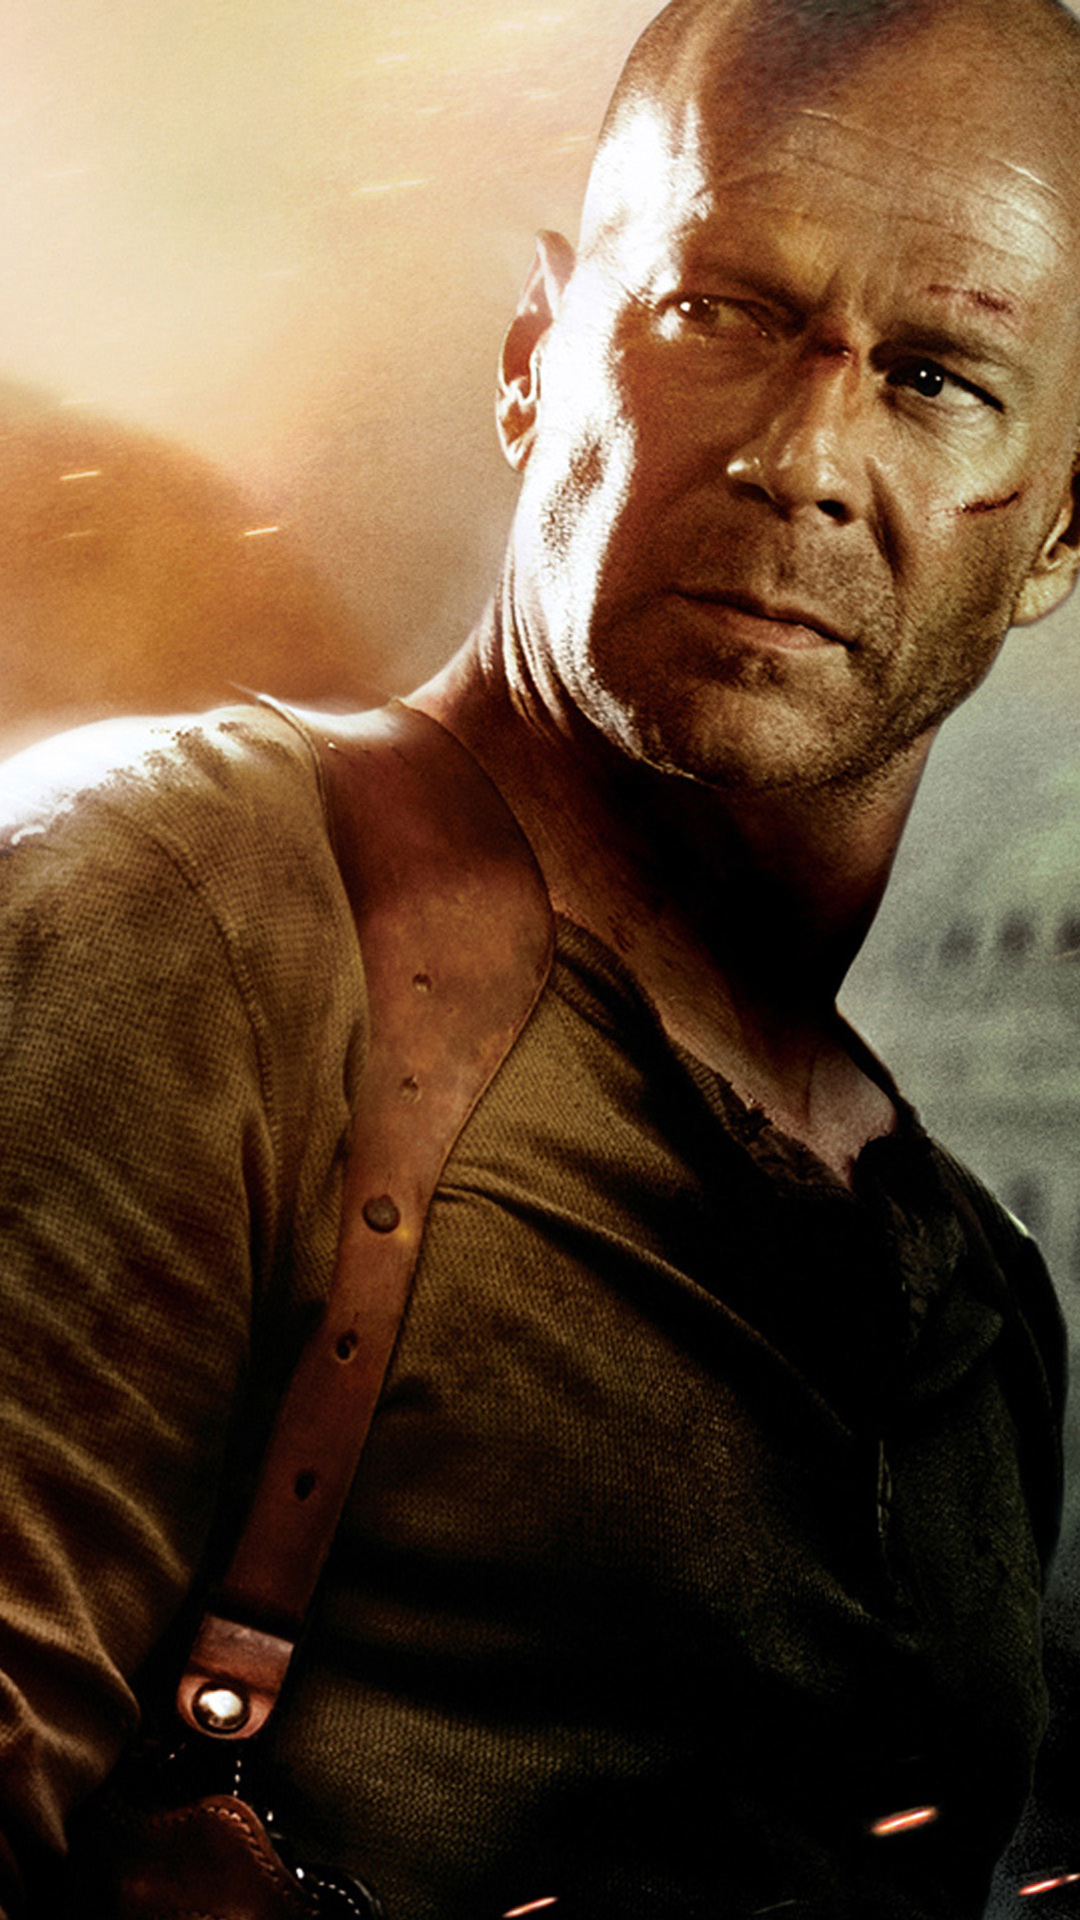 Bruce Willis Best htc one wallpapers free and easy to download